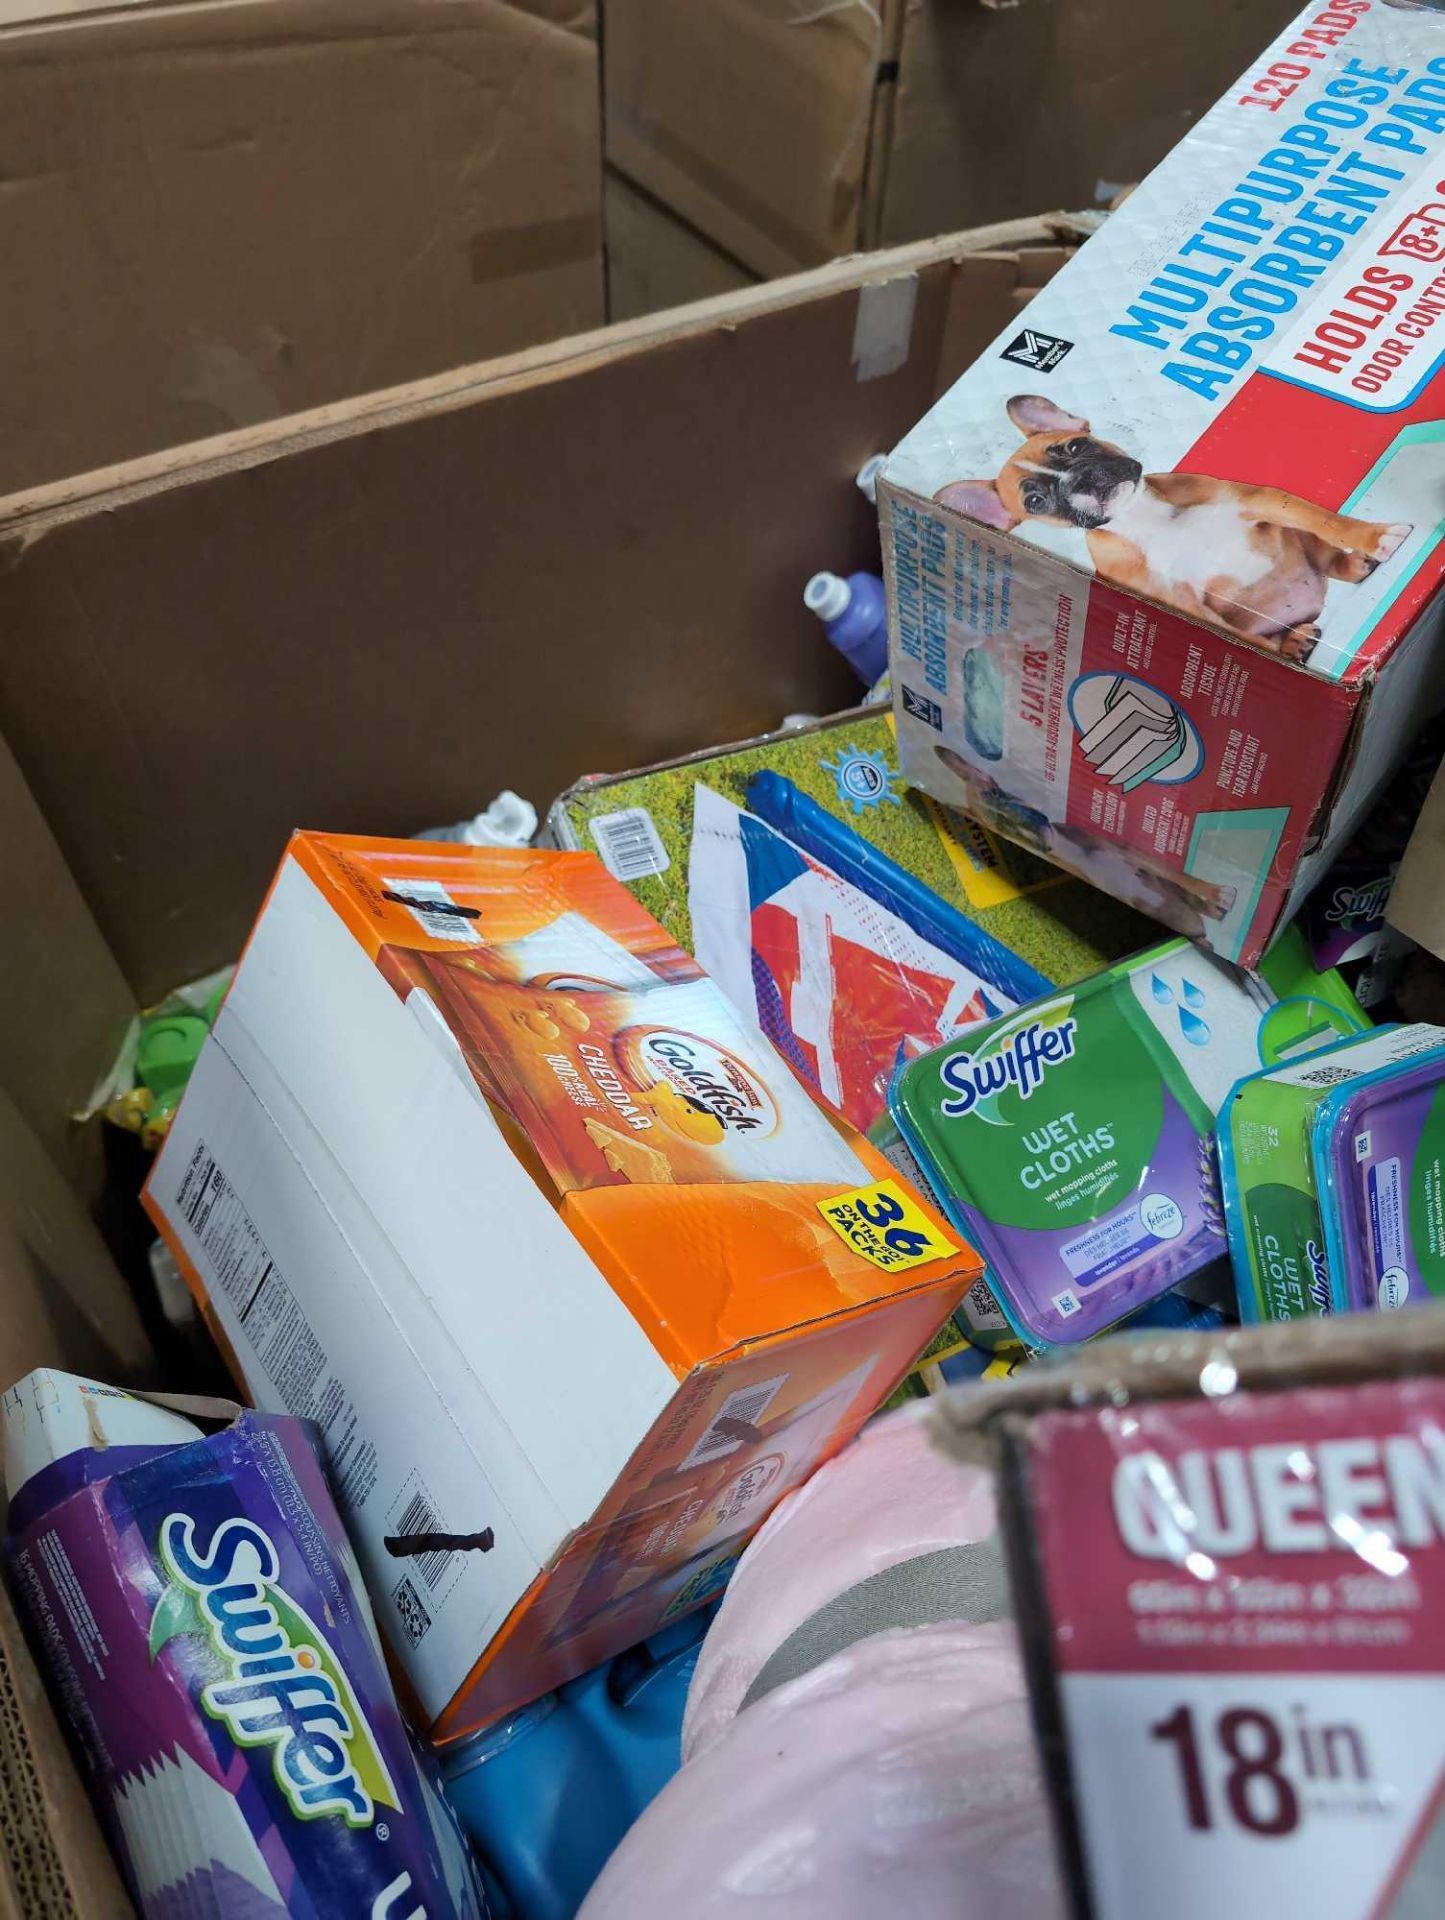 Big box store in a box, pampers, Sheets, Blanket, Intex blow up bed, swiffer wet cloths, gold fish, - Image 6 of 20